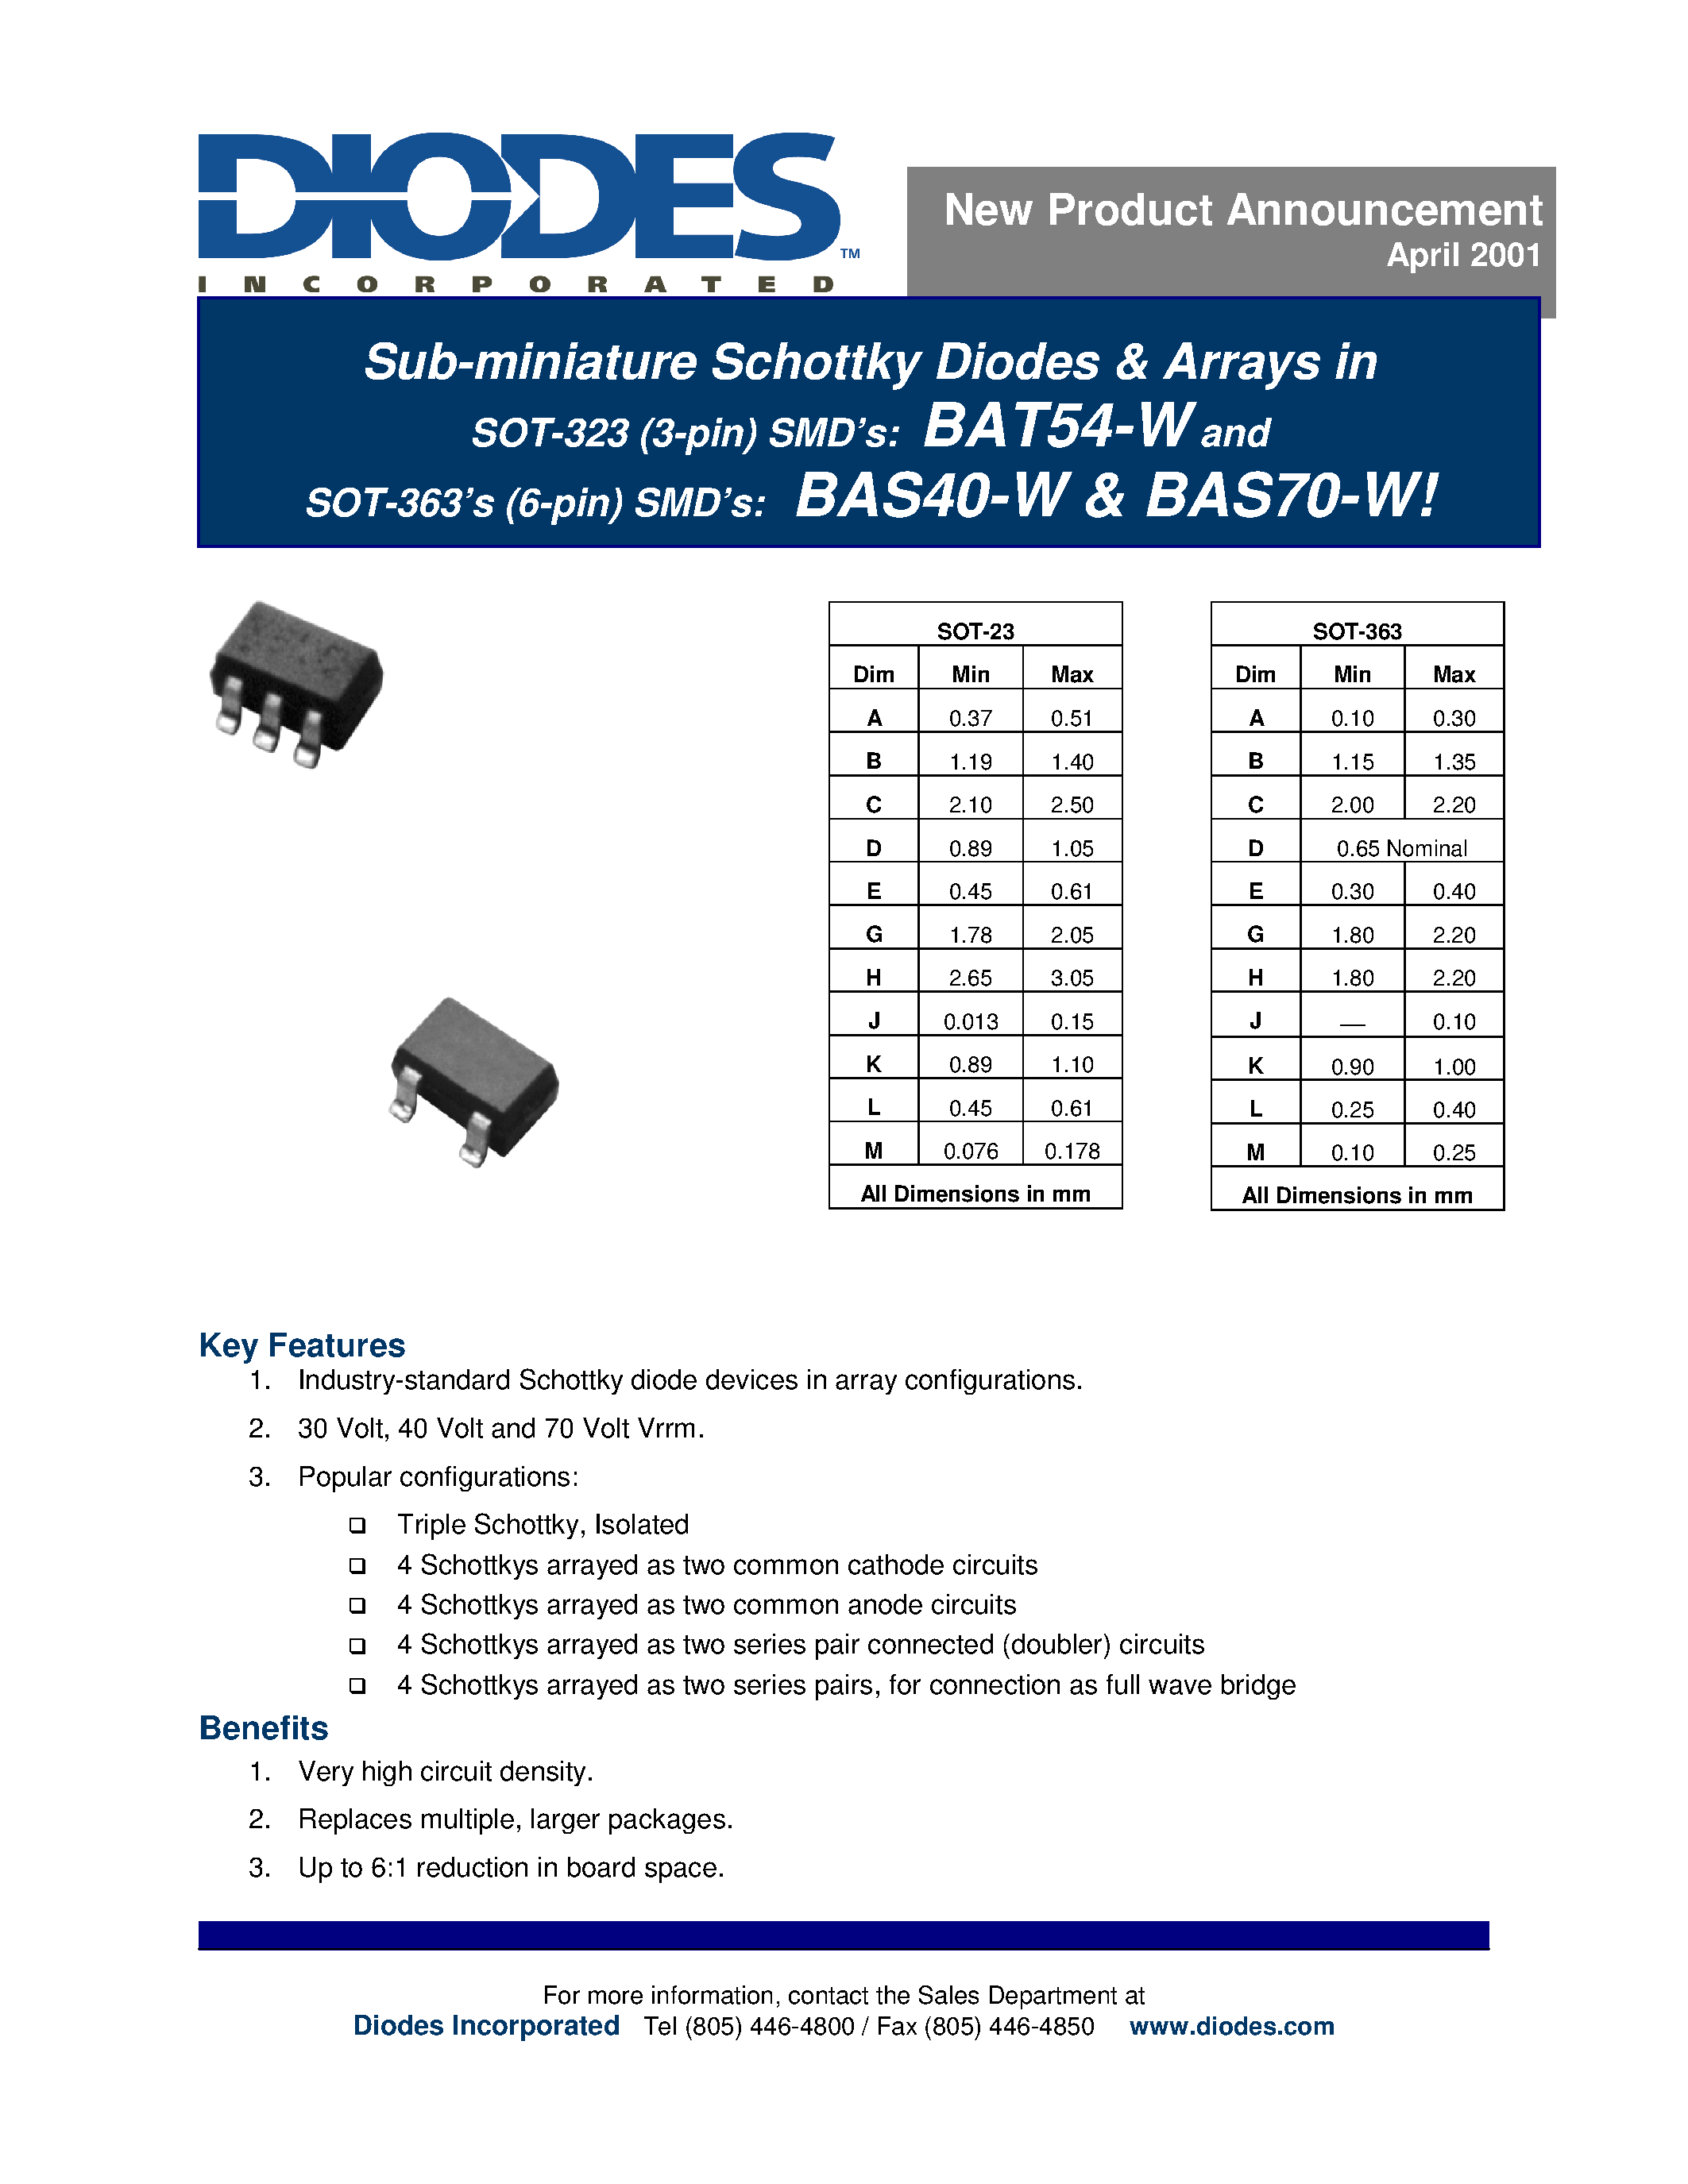 Даташит BAS40-W - Sub-miniature Schottky Diodes & Arrays in страница 1